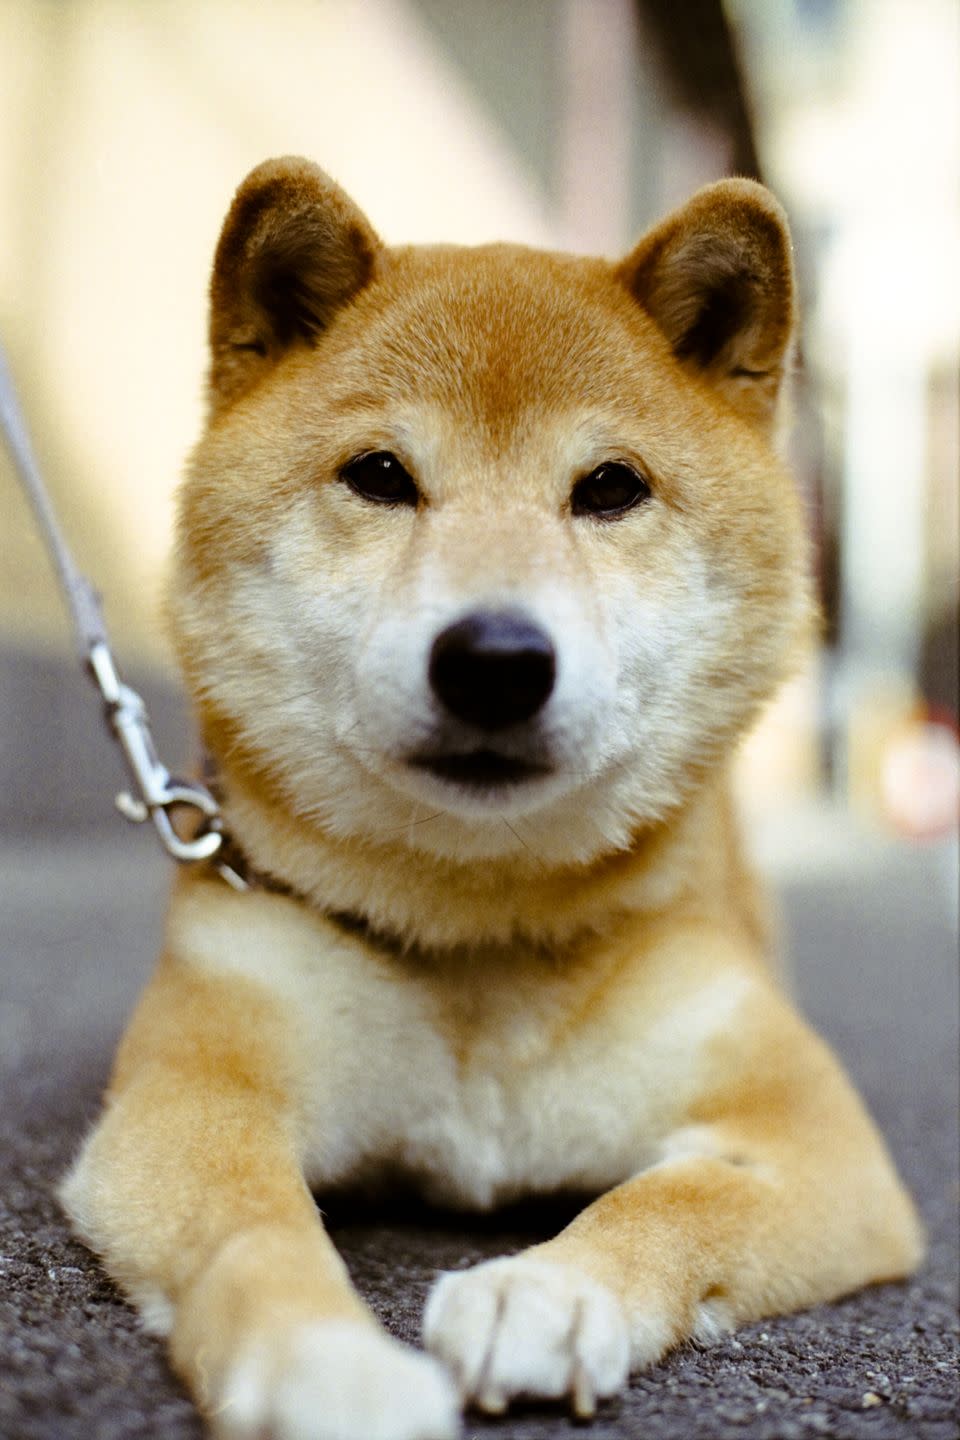 <p>While they're most widely known as part of the popular doge meme, Shibas won't be saying "much wow" anytime soon. The canines stay pretty mum — until they engage in the occasional <a href="https://myfirstshiba.com/what-is-a-shiba-inu-scream/" rel="nofollow noopener" target="_blank" data-ylk="slk:&quot;Shiba scream.&quot;" class="link ">"Shiba scream."</a> </p>